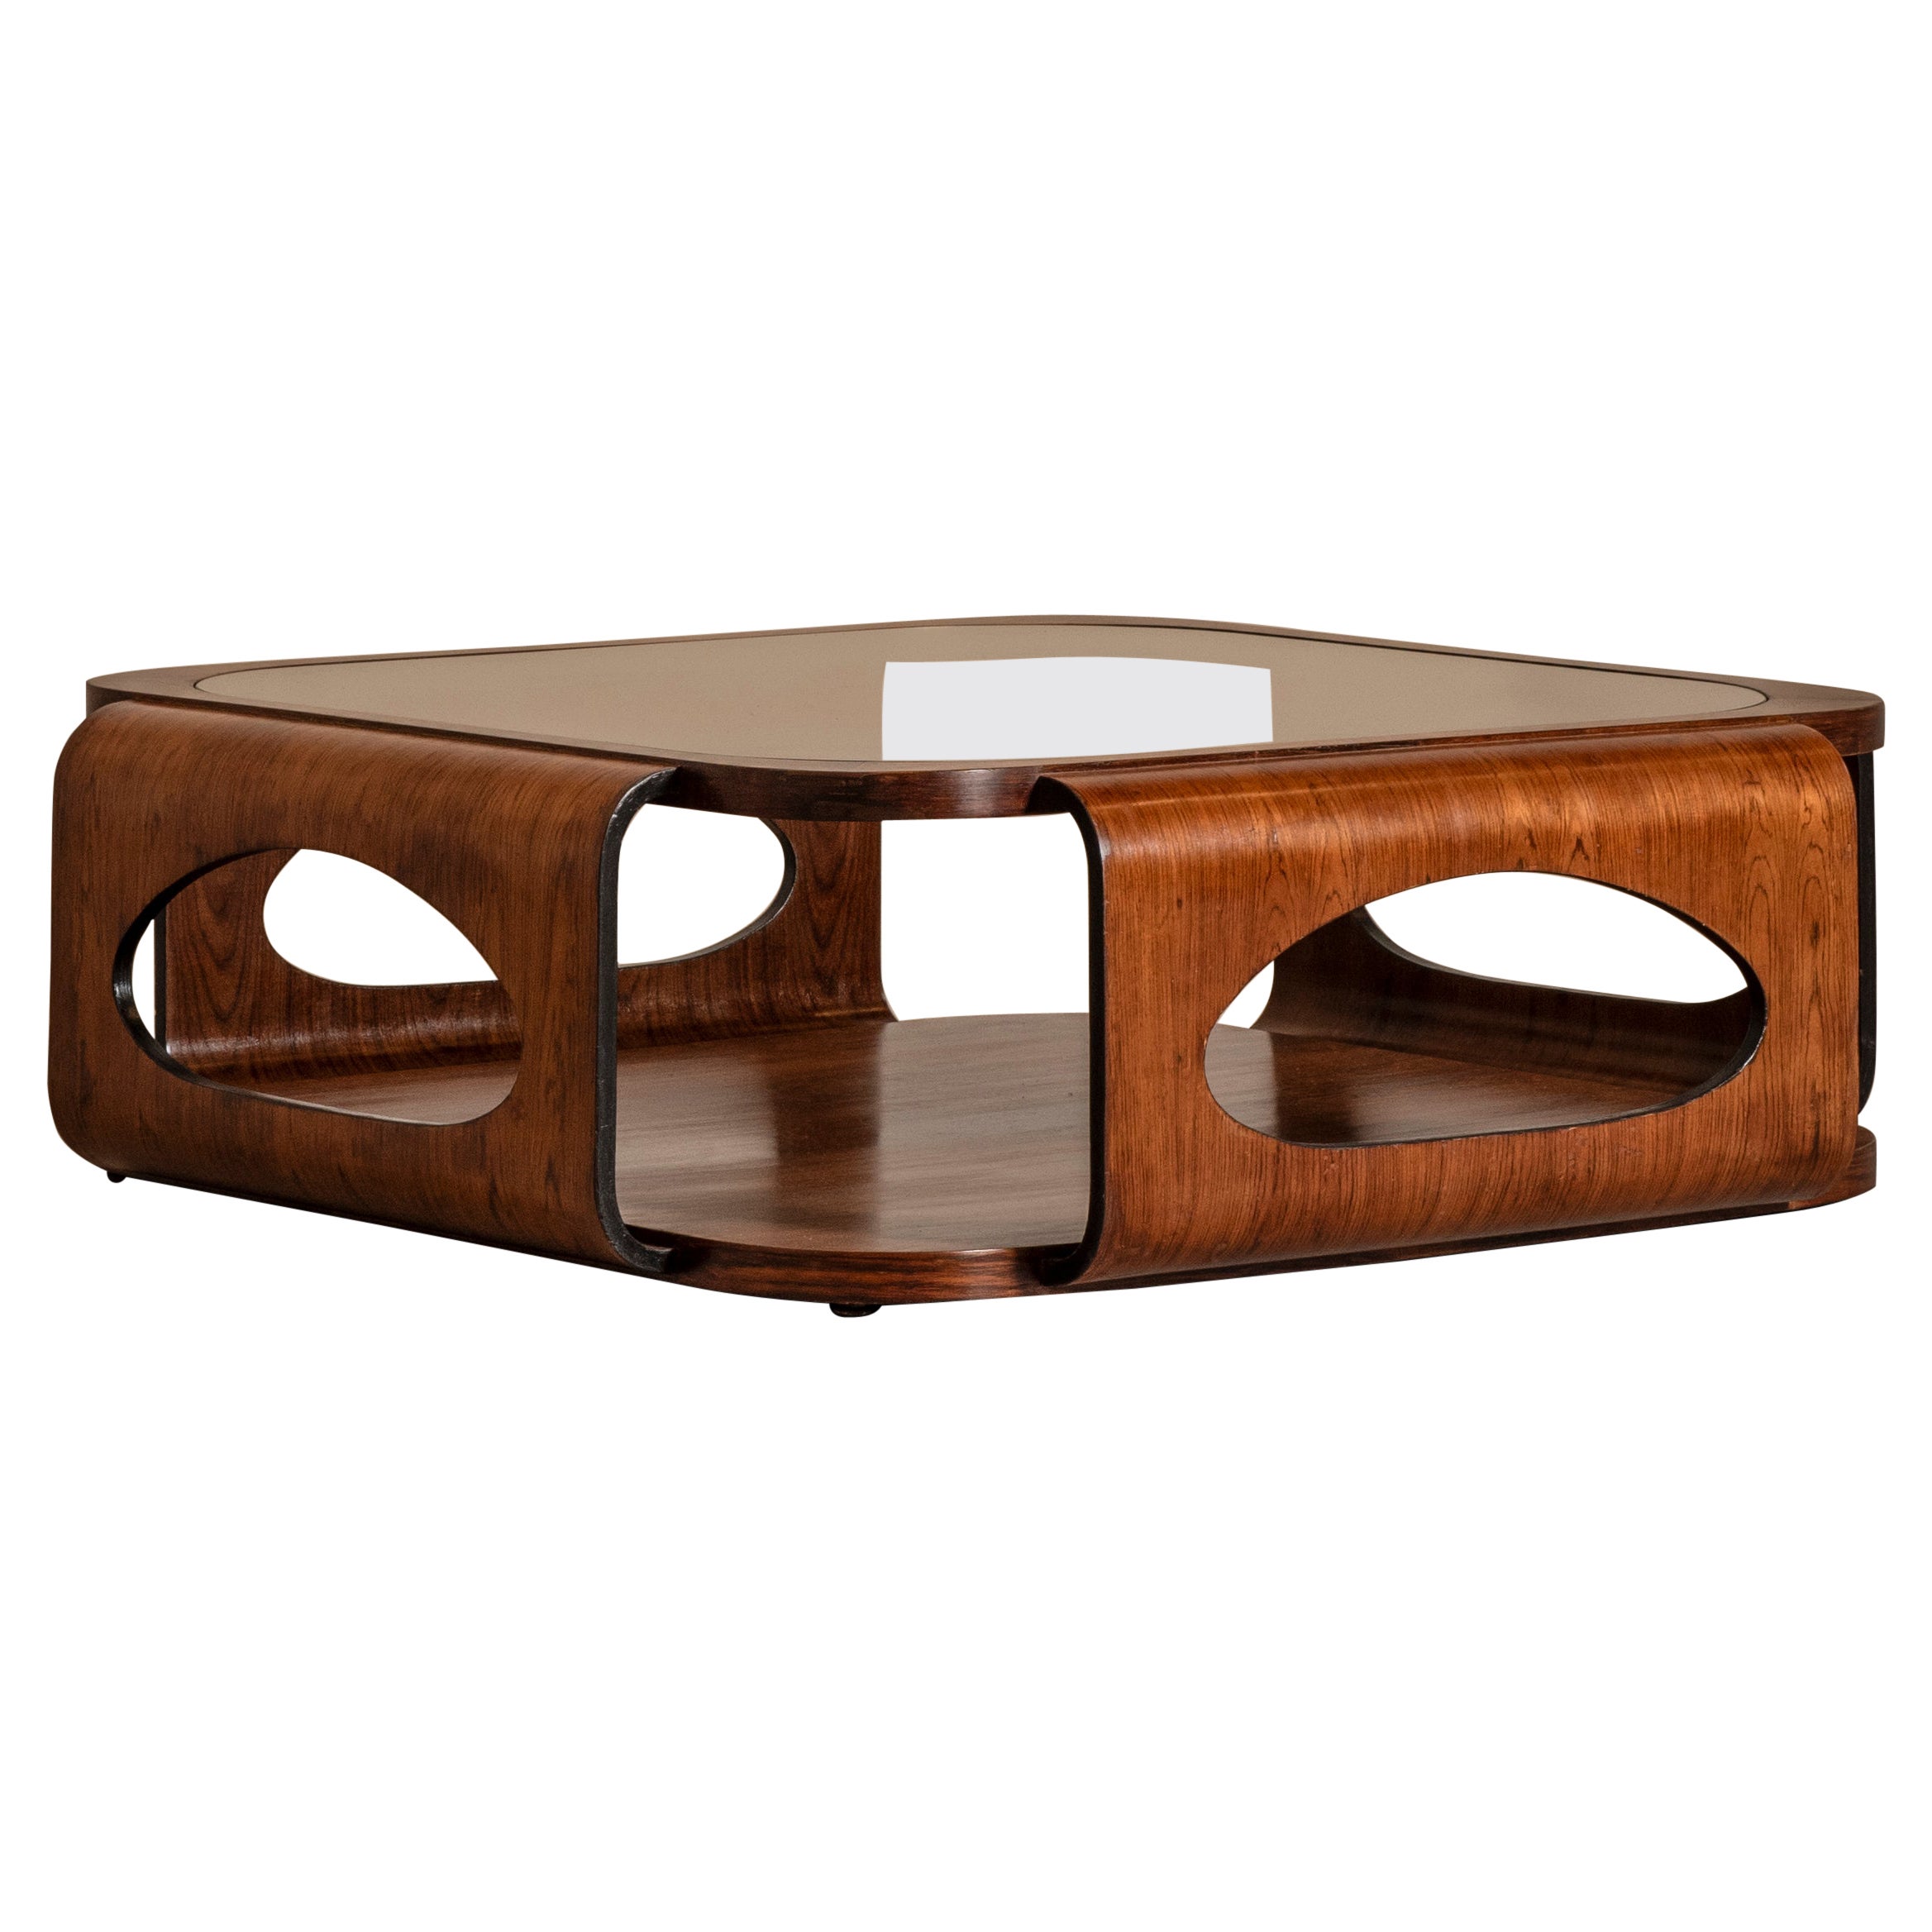 Center Table in Wood and Glass, by Móveis Bertomeu, Mid-Century Modern Design